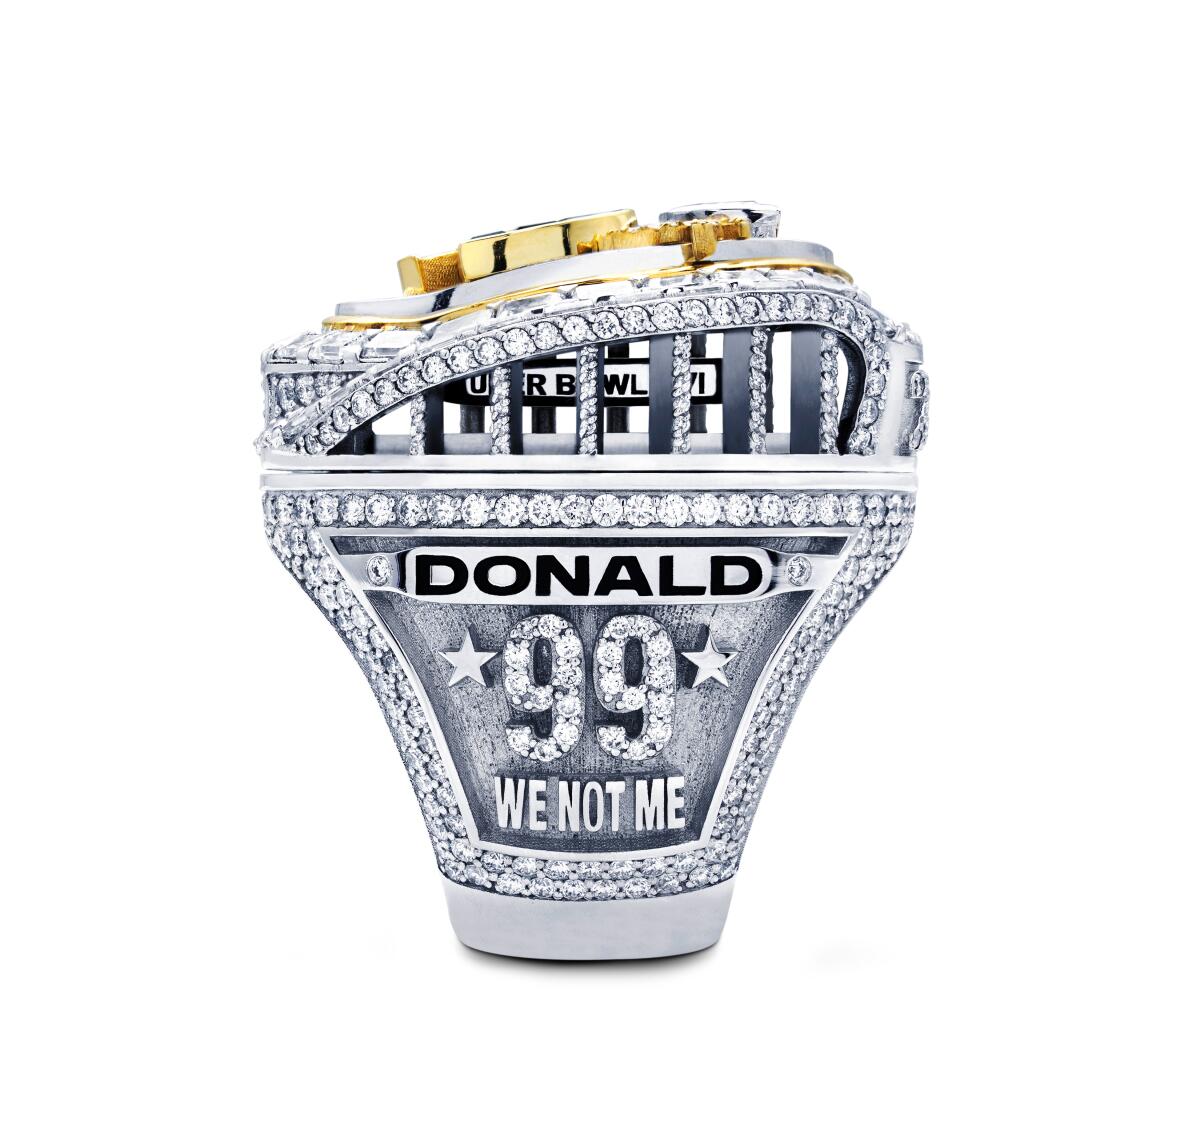 Take a look at the Rams' Super Bowl LVI rings. There's a surprise